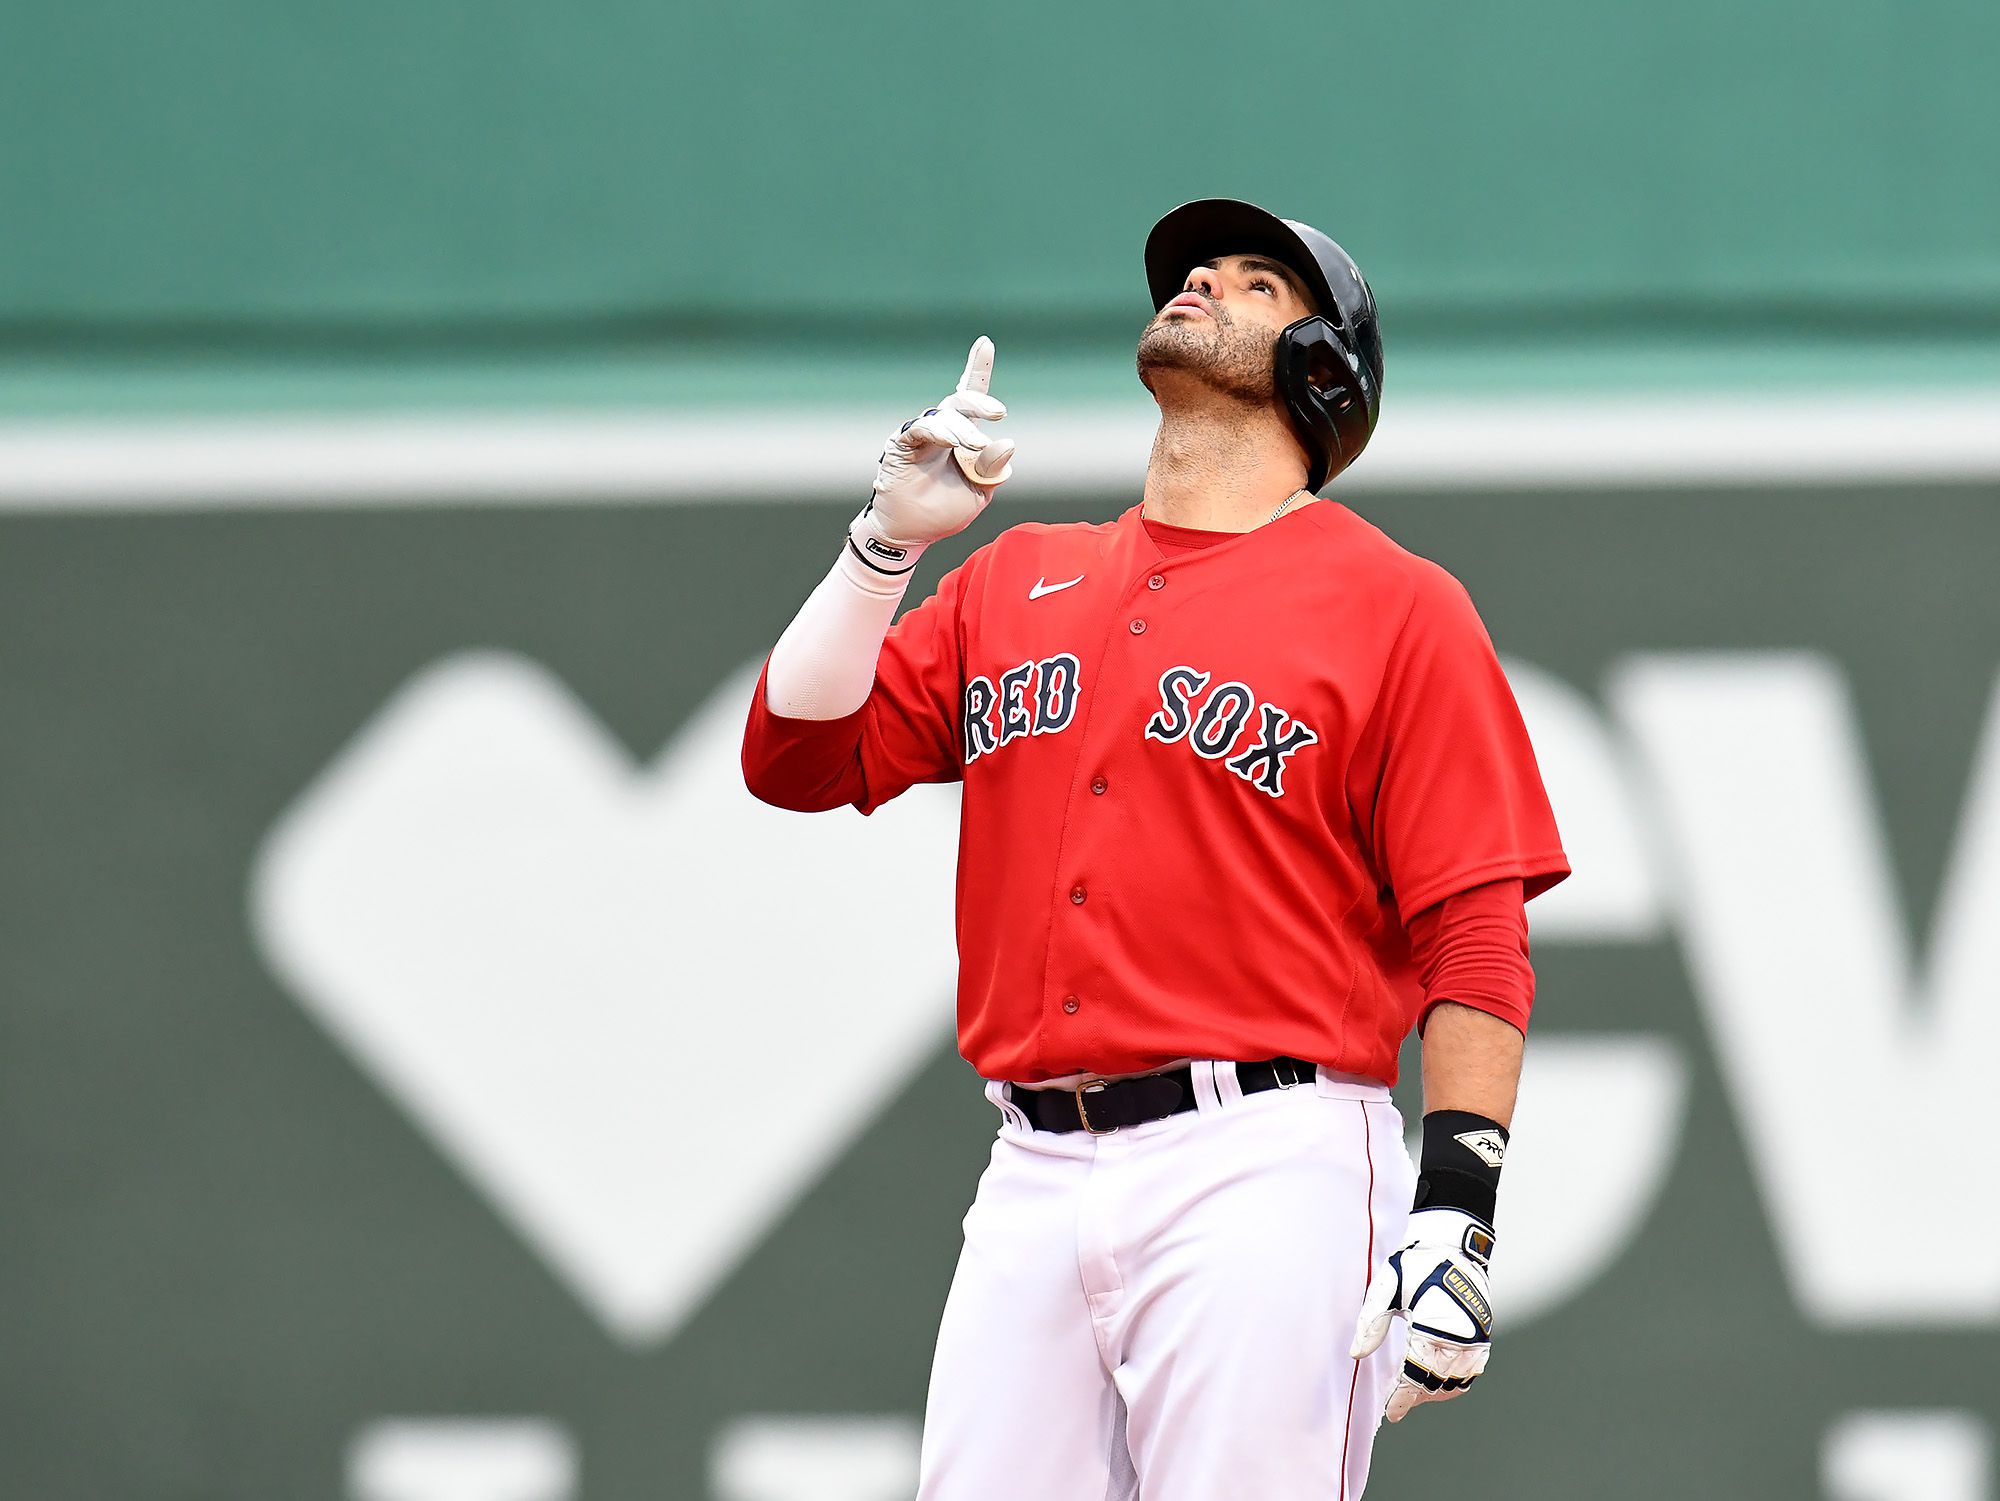 Report: Red Sox interested in bringing back Martinez